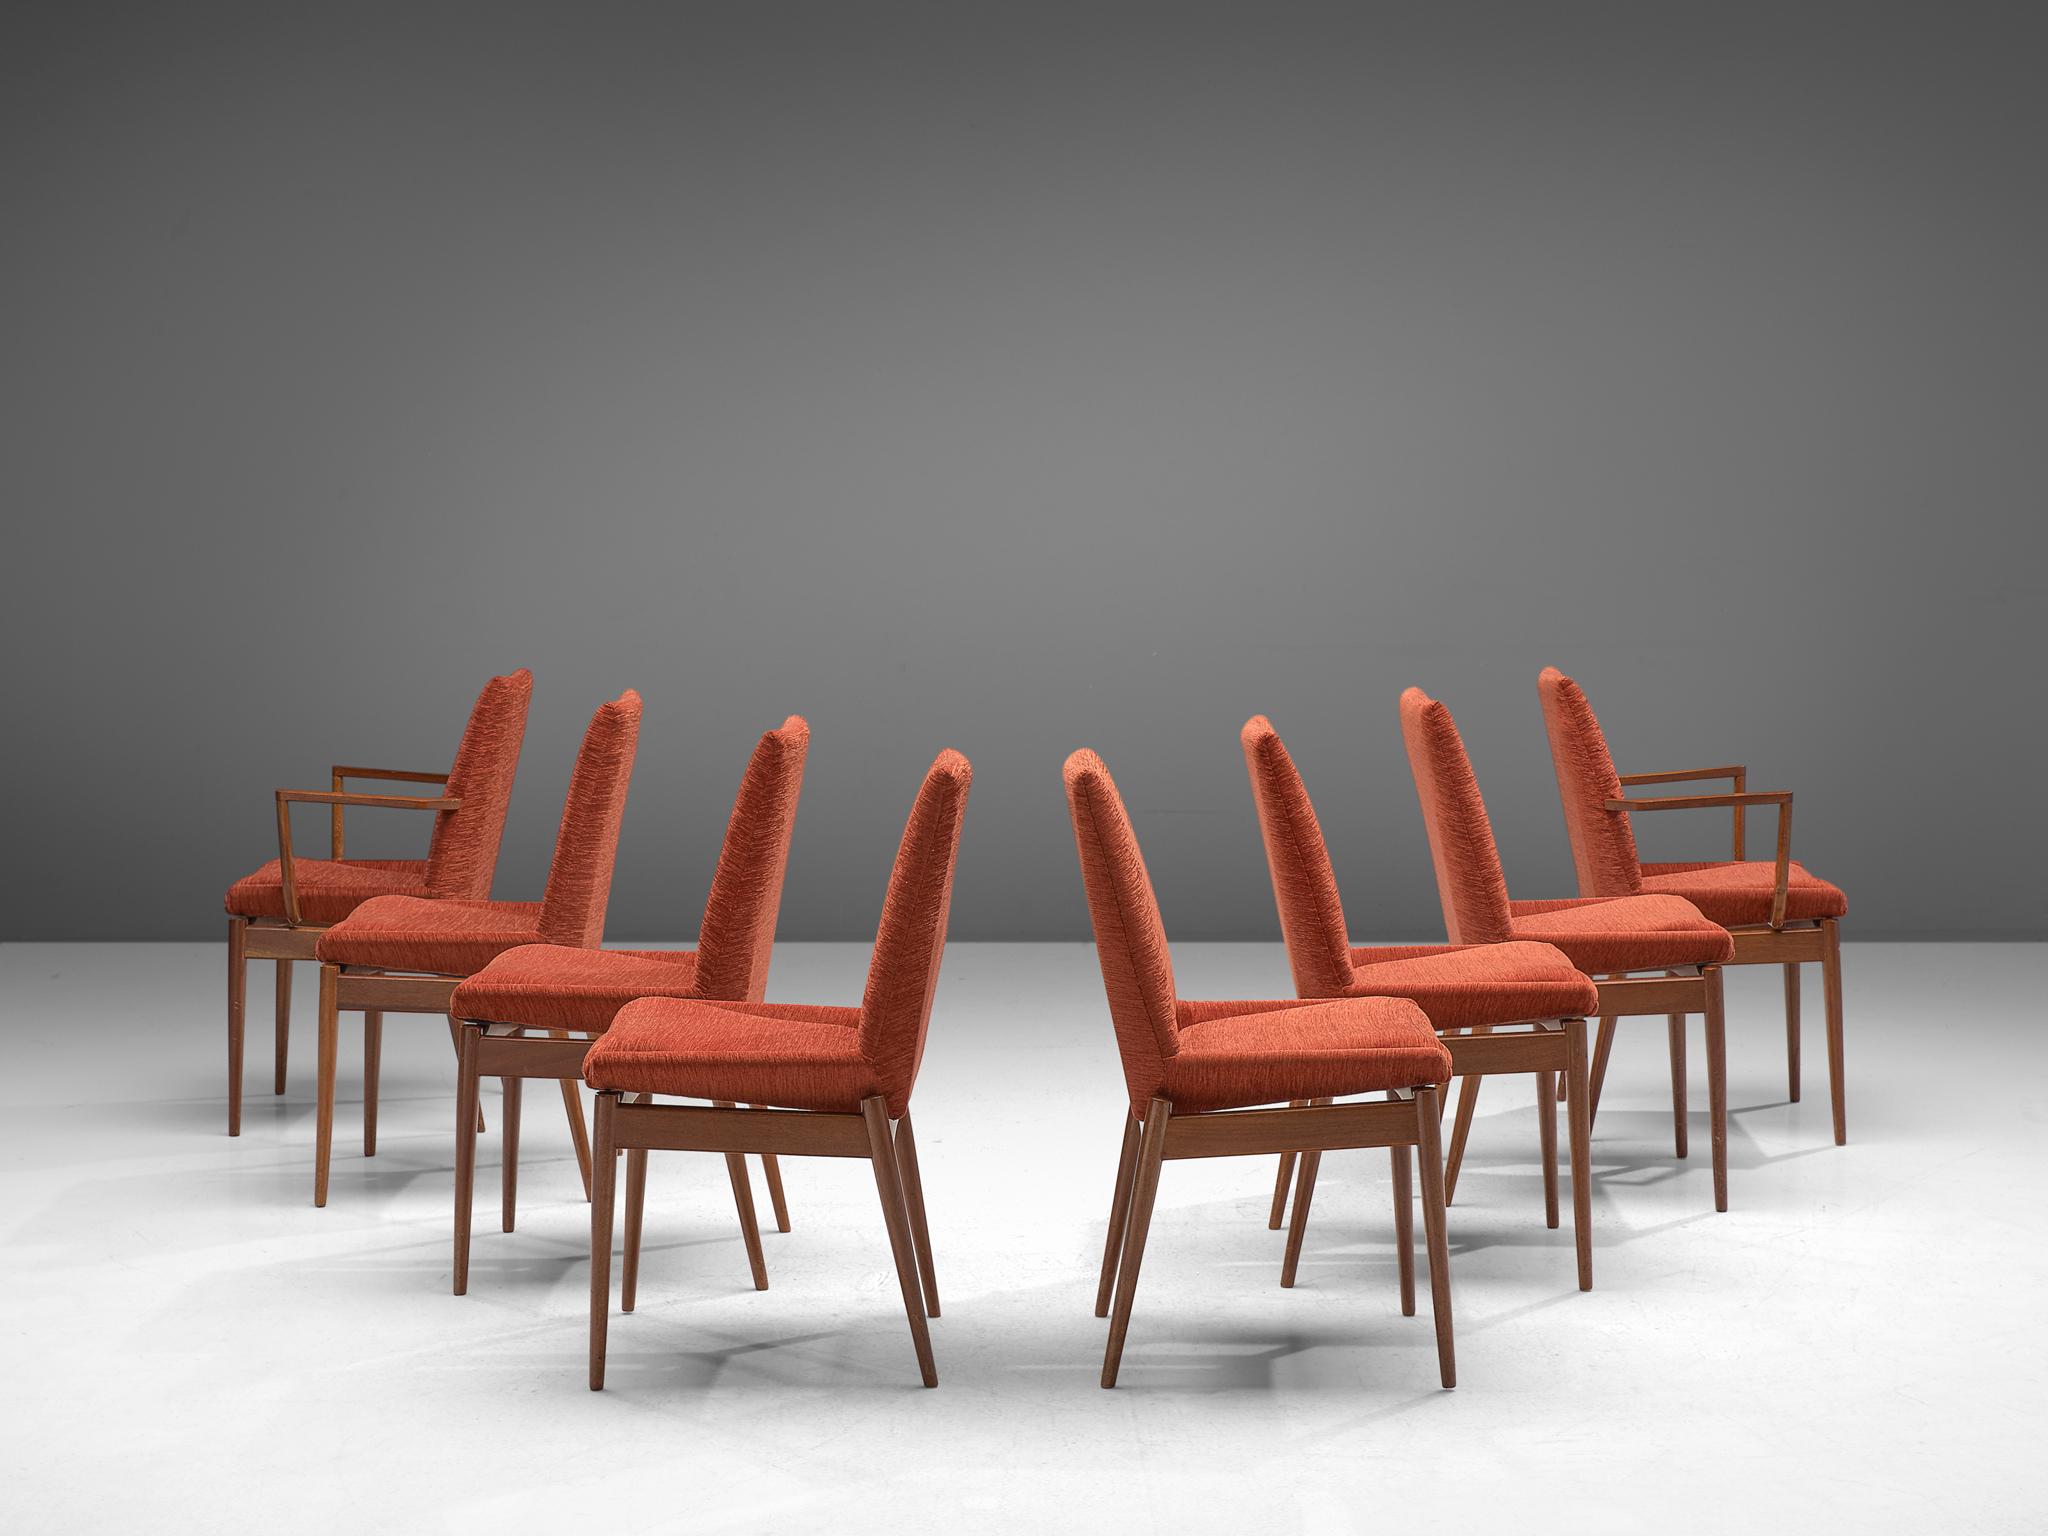 Set of 8 dining chairs, teak, red orange corduroy, Scandinavia, circa 1955.

The set of eight chairs is sensuous, sculptural and elegant. Two chairs dramatically high and sculpted armrests, while six have no armrests. The design features a high,